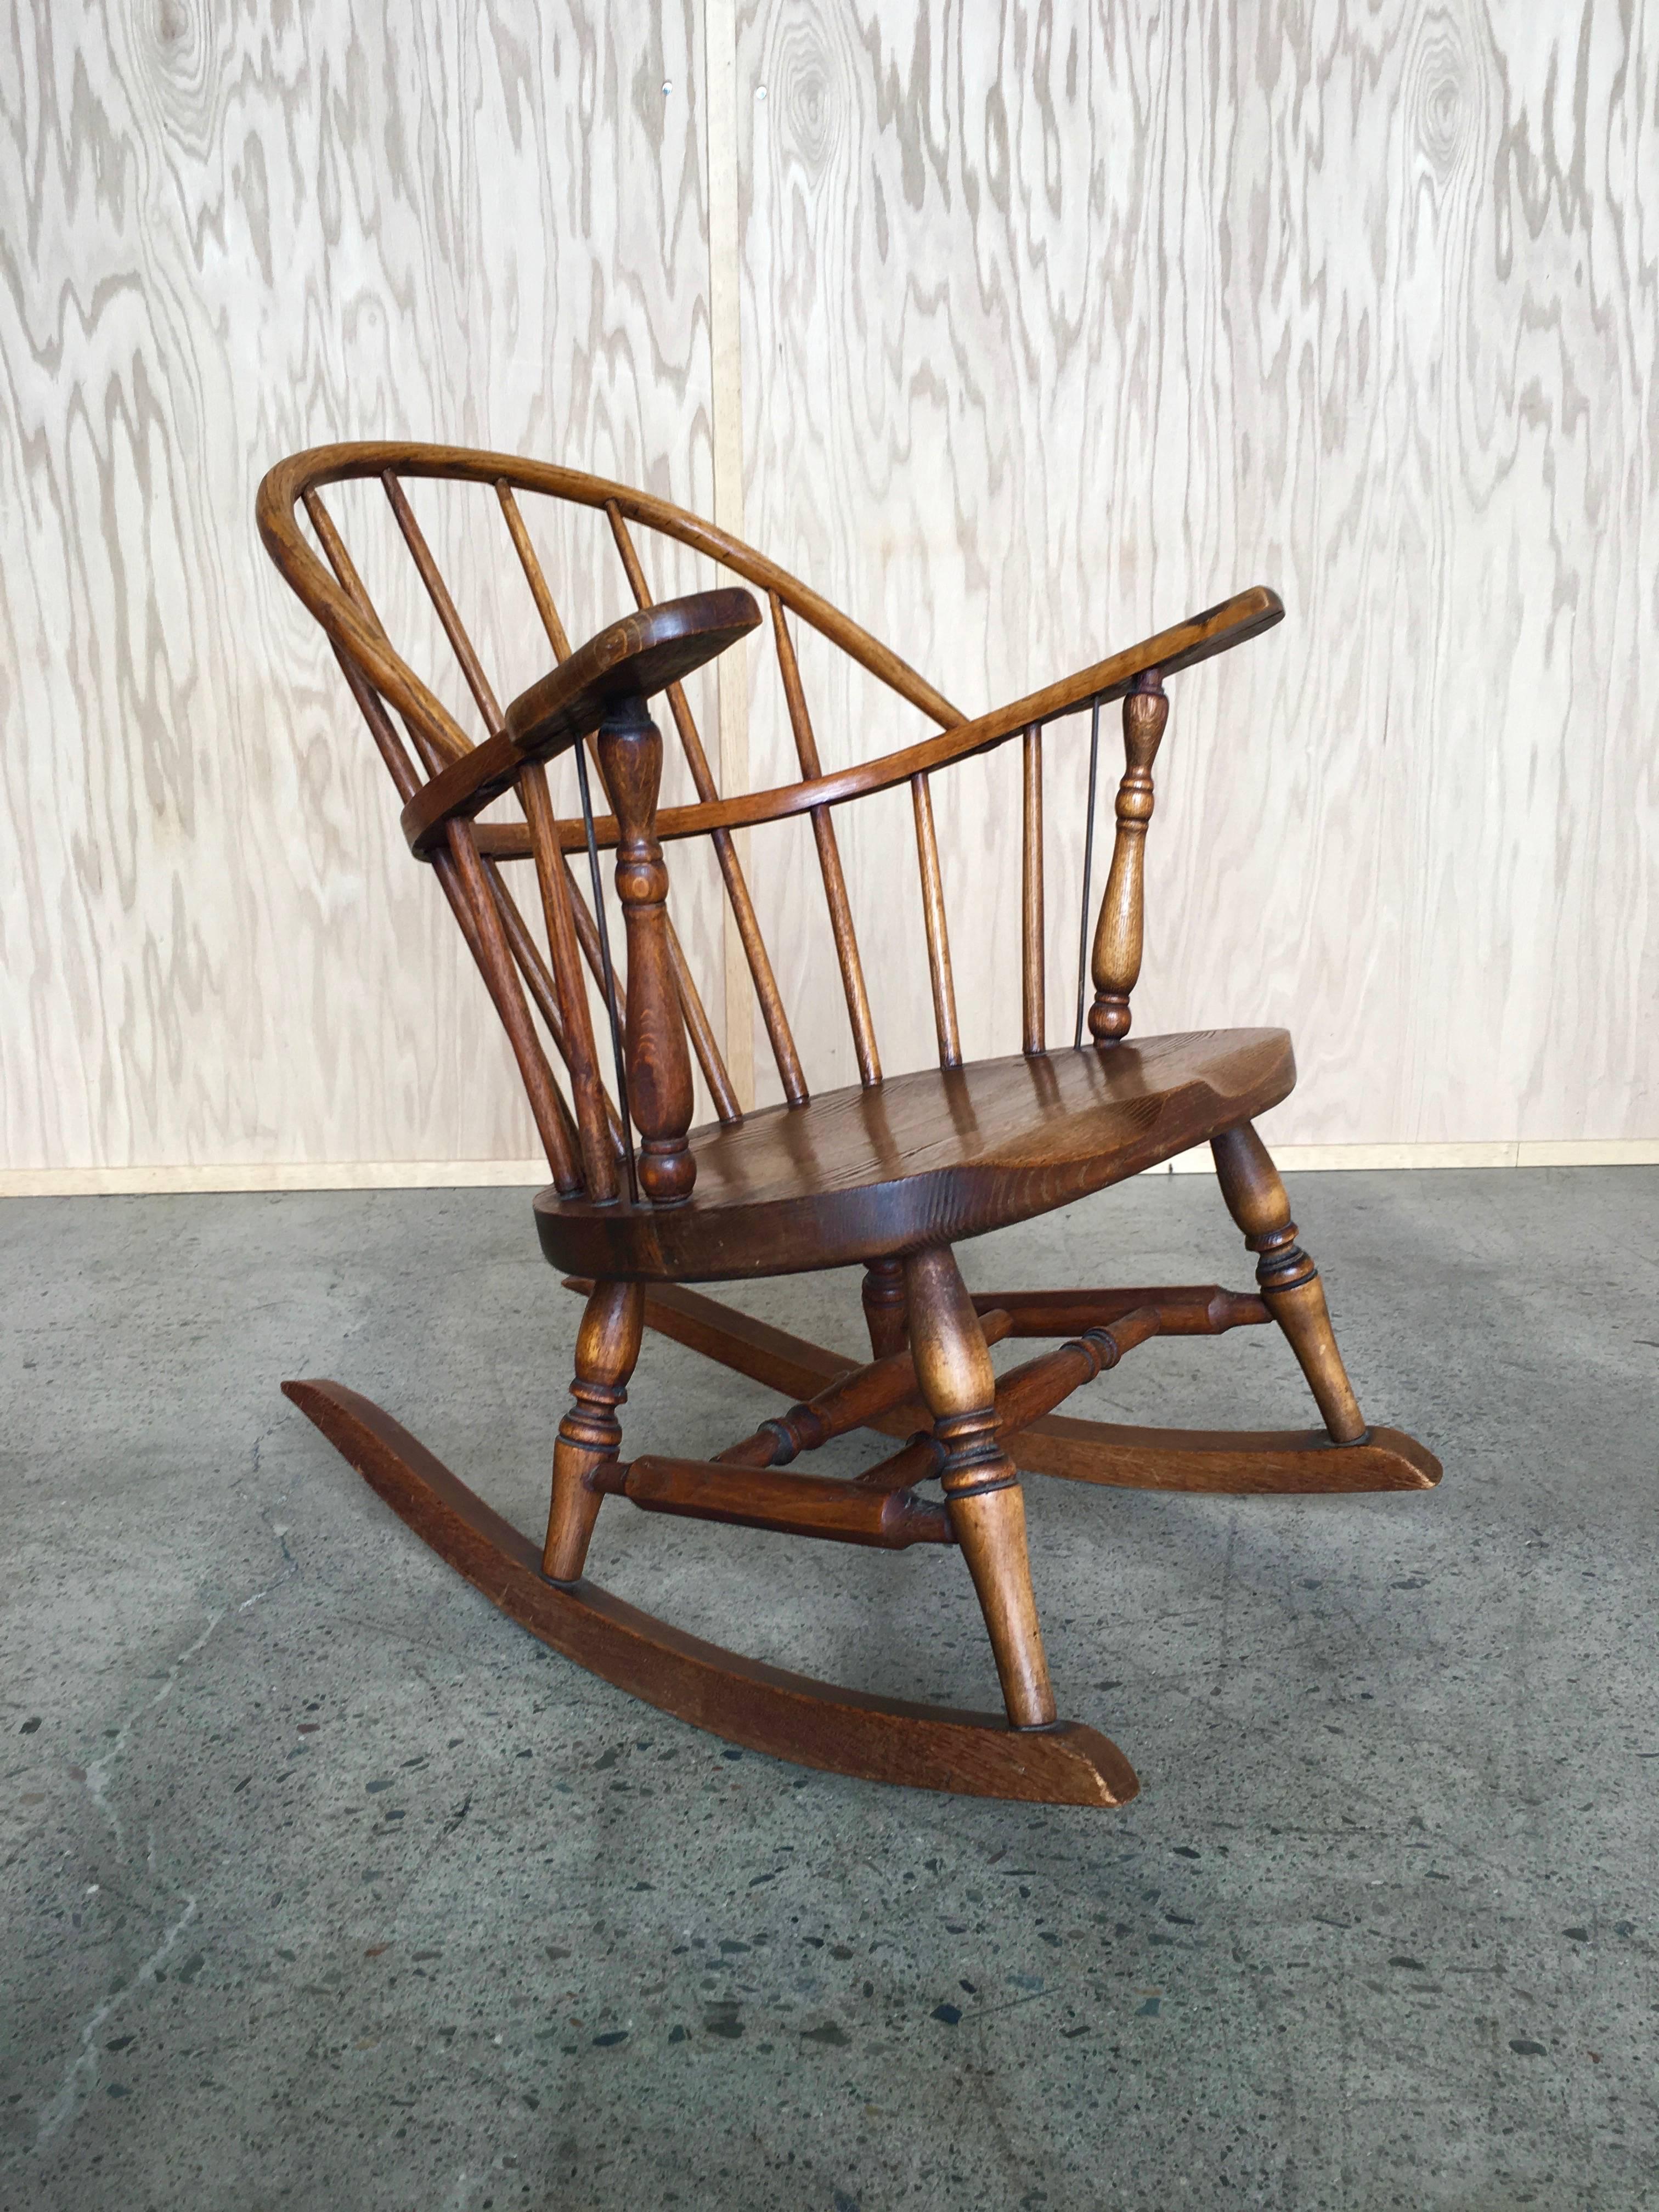 Windsor childs rocking chair by H.P. Atkinson & Sons.